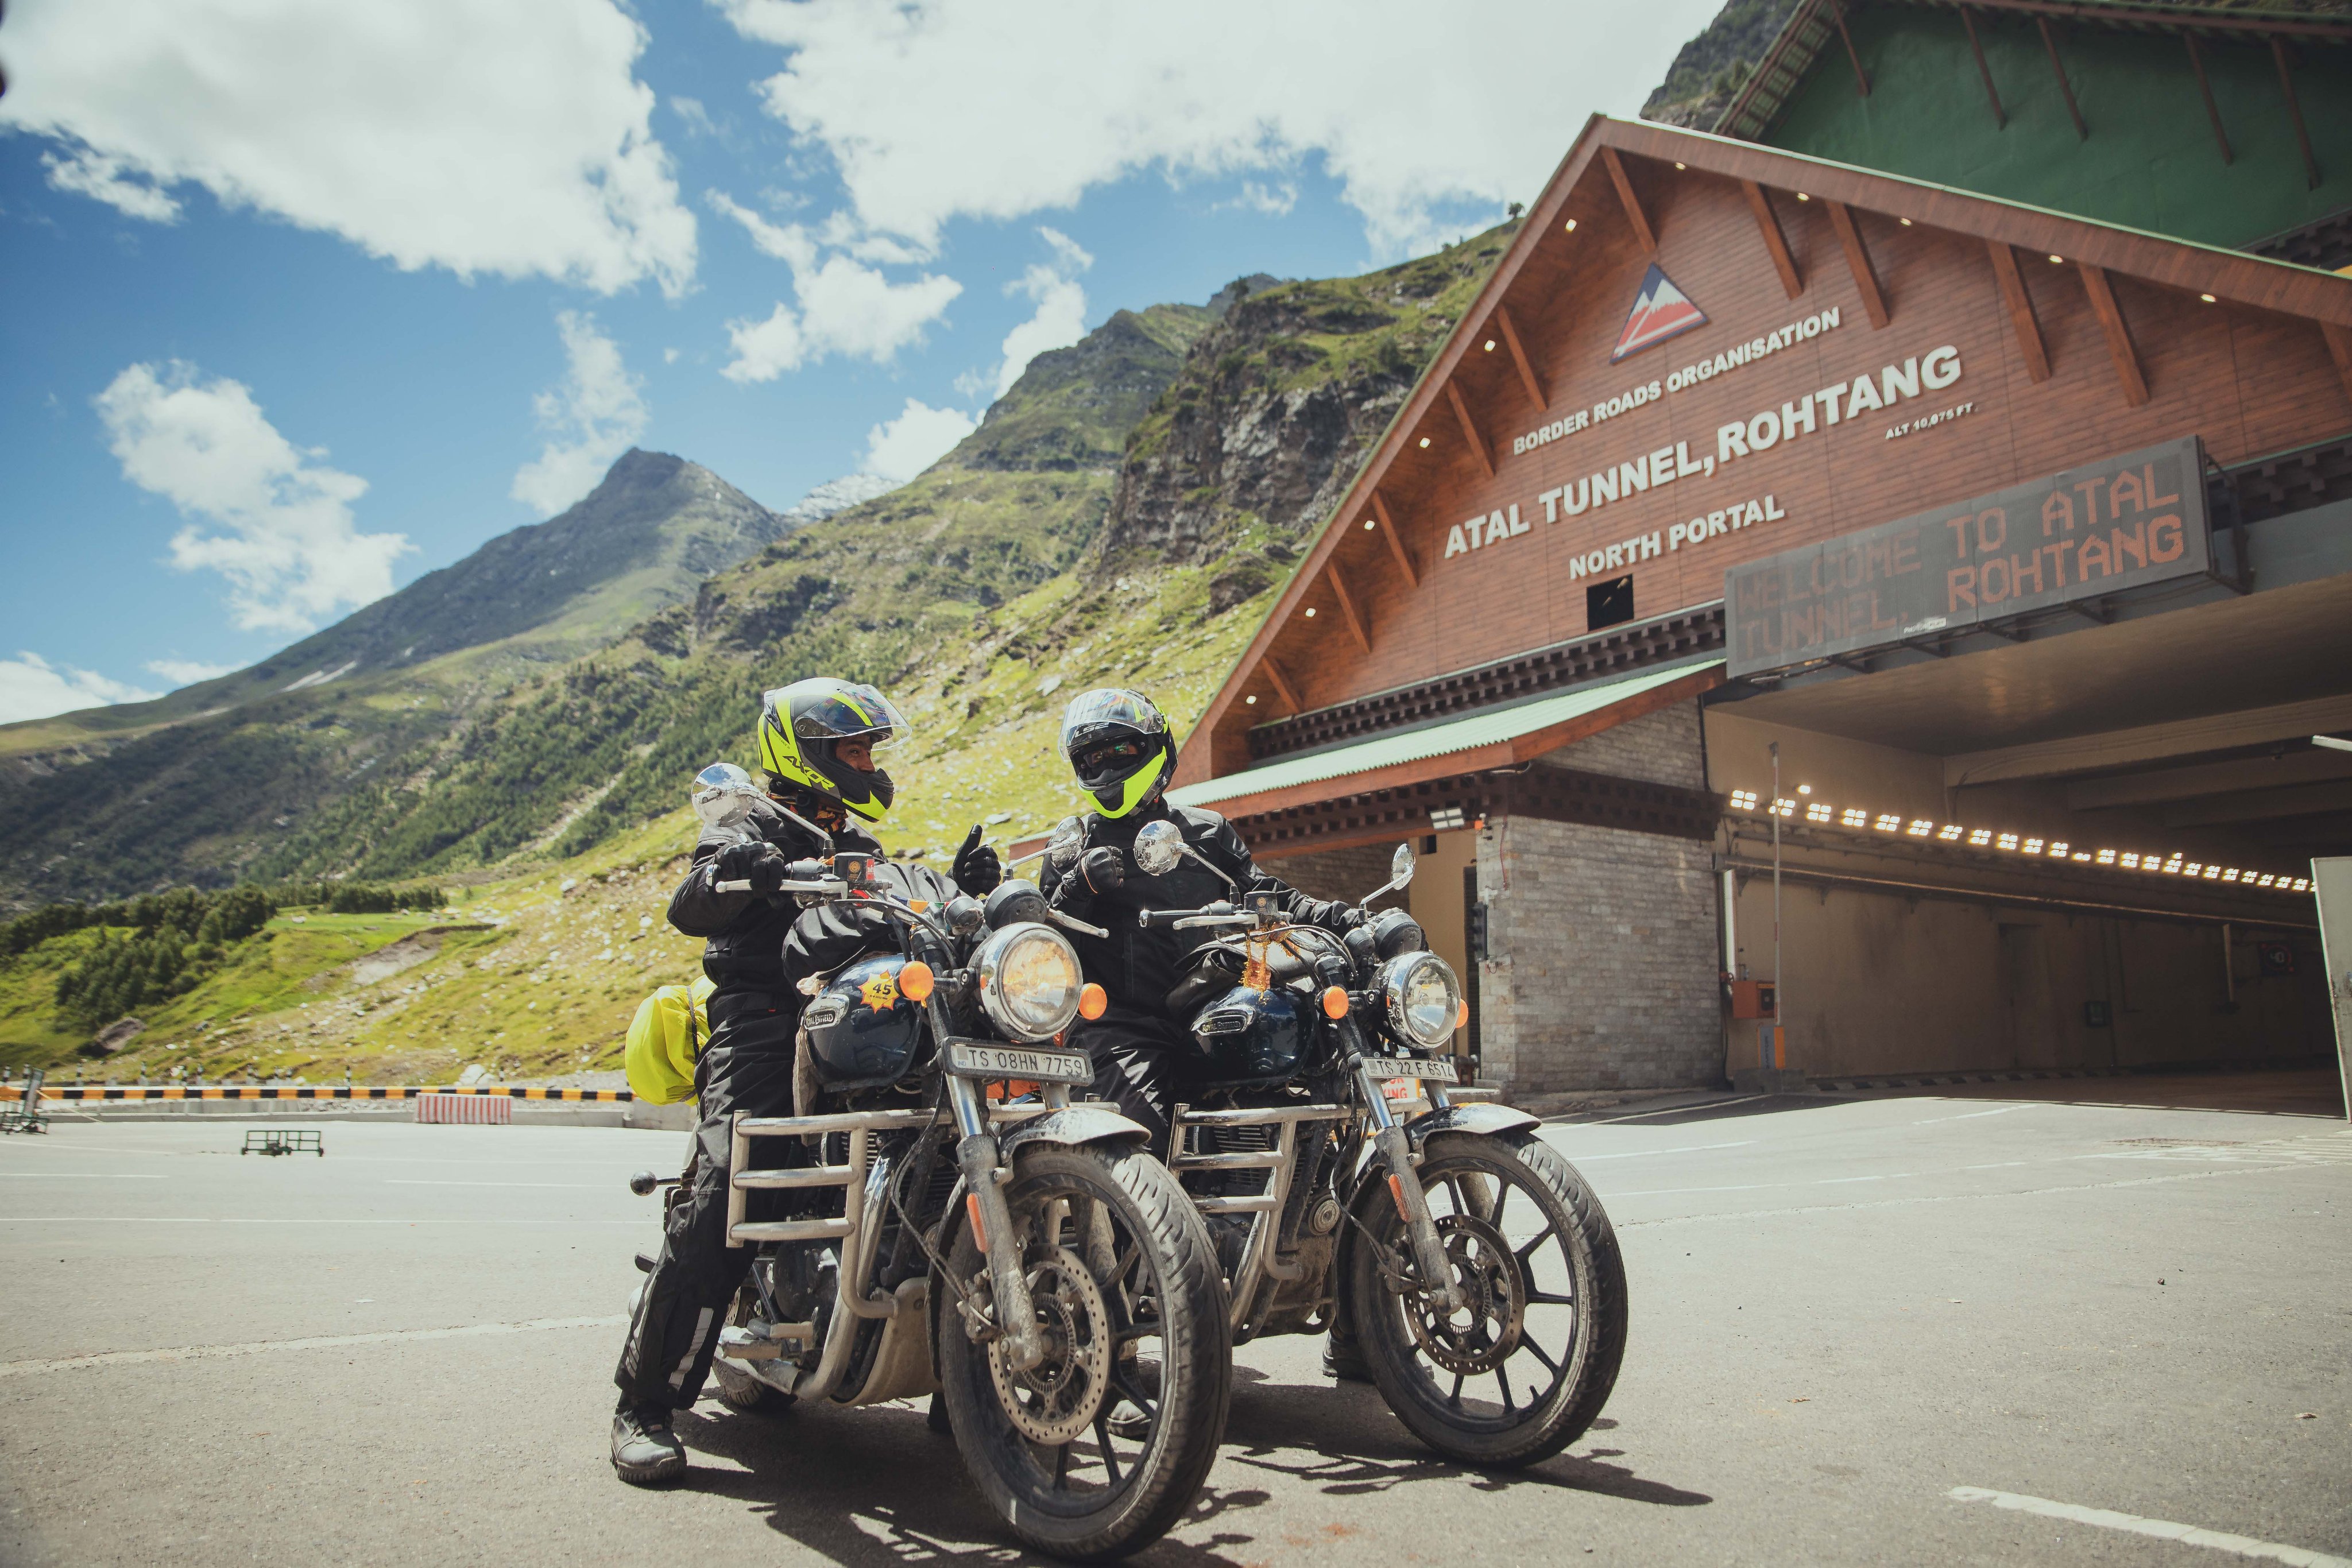 Royal Enfield on X: "Group 2 rode from Jispa through the famous Atal tunnel  onwards to Manali. Leaving Lahaul Spiti Valley saw the surrounding scenery  change from barren rocky mountain slopes to